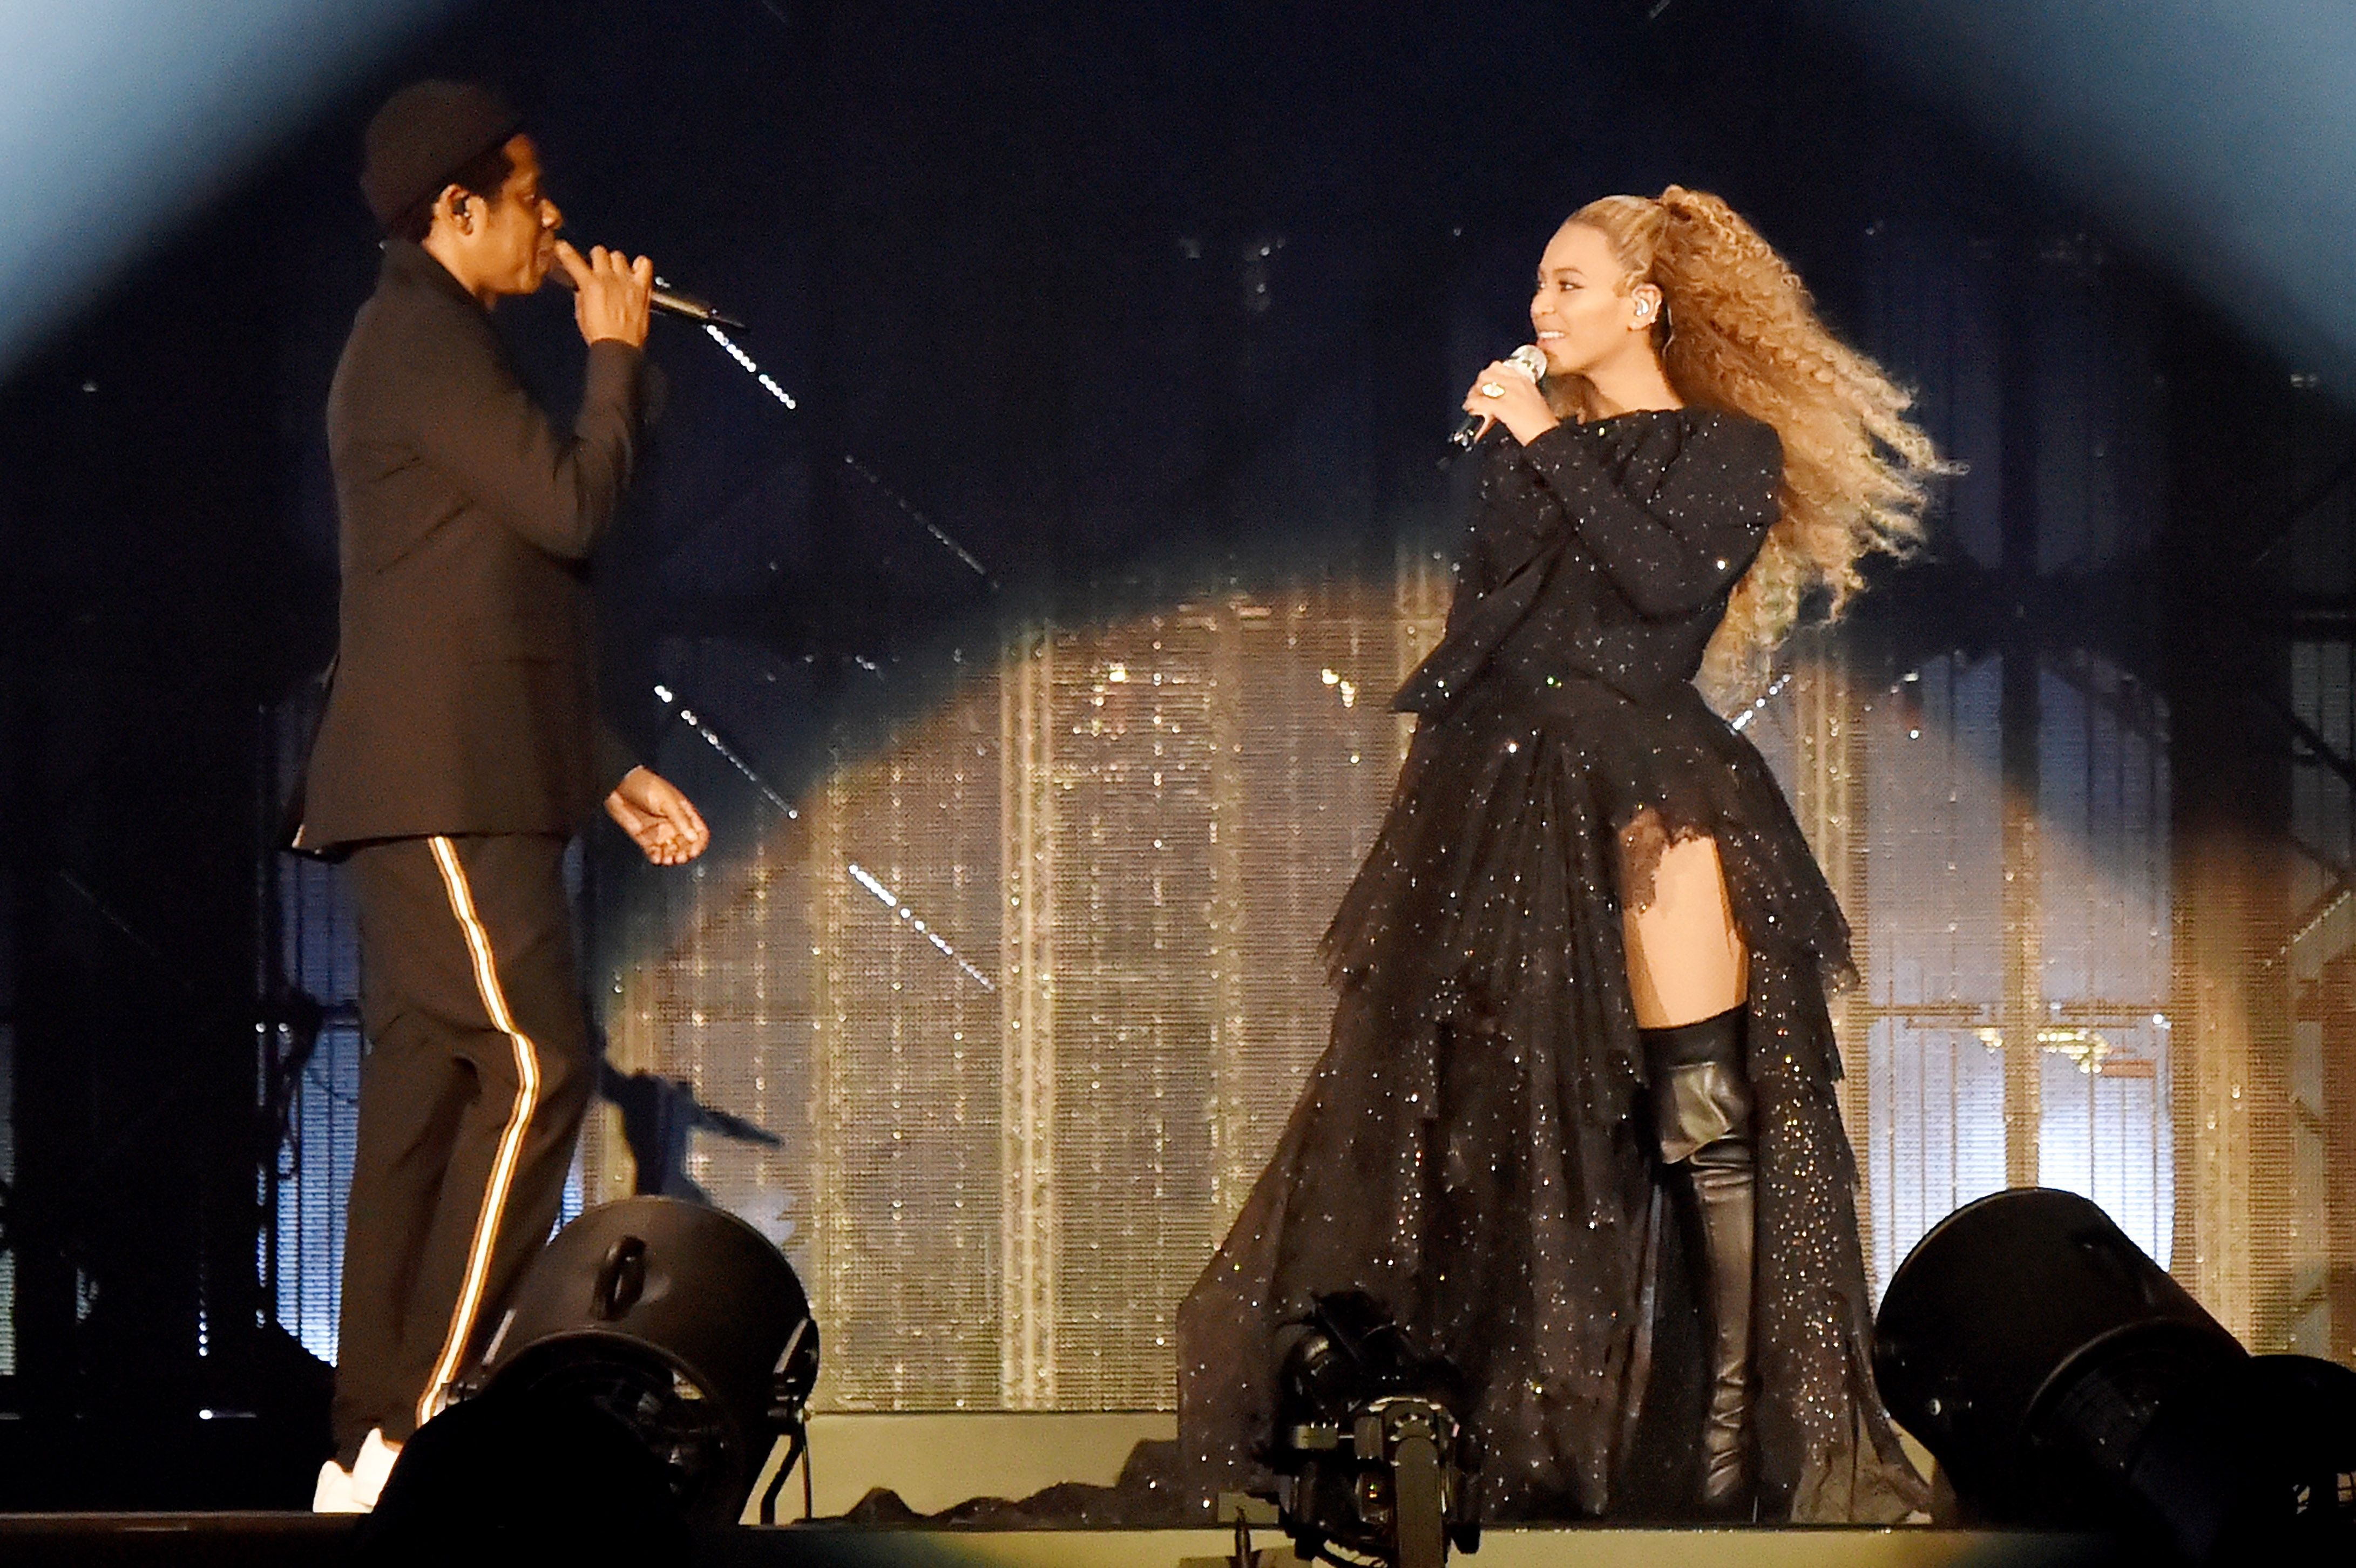 Beyoncé and Jay-Z Announce Their Tour… in Ski Masks?